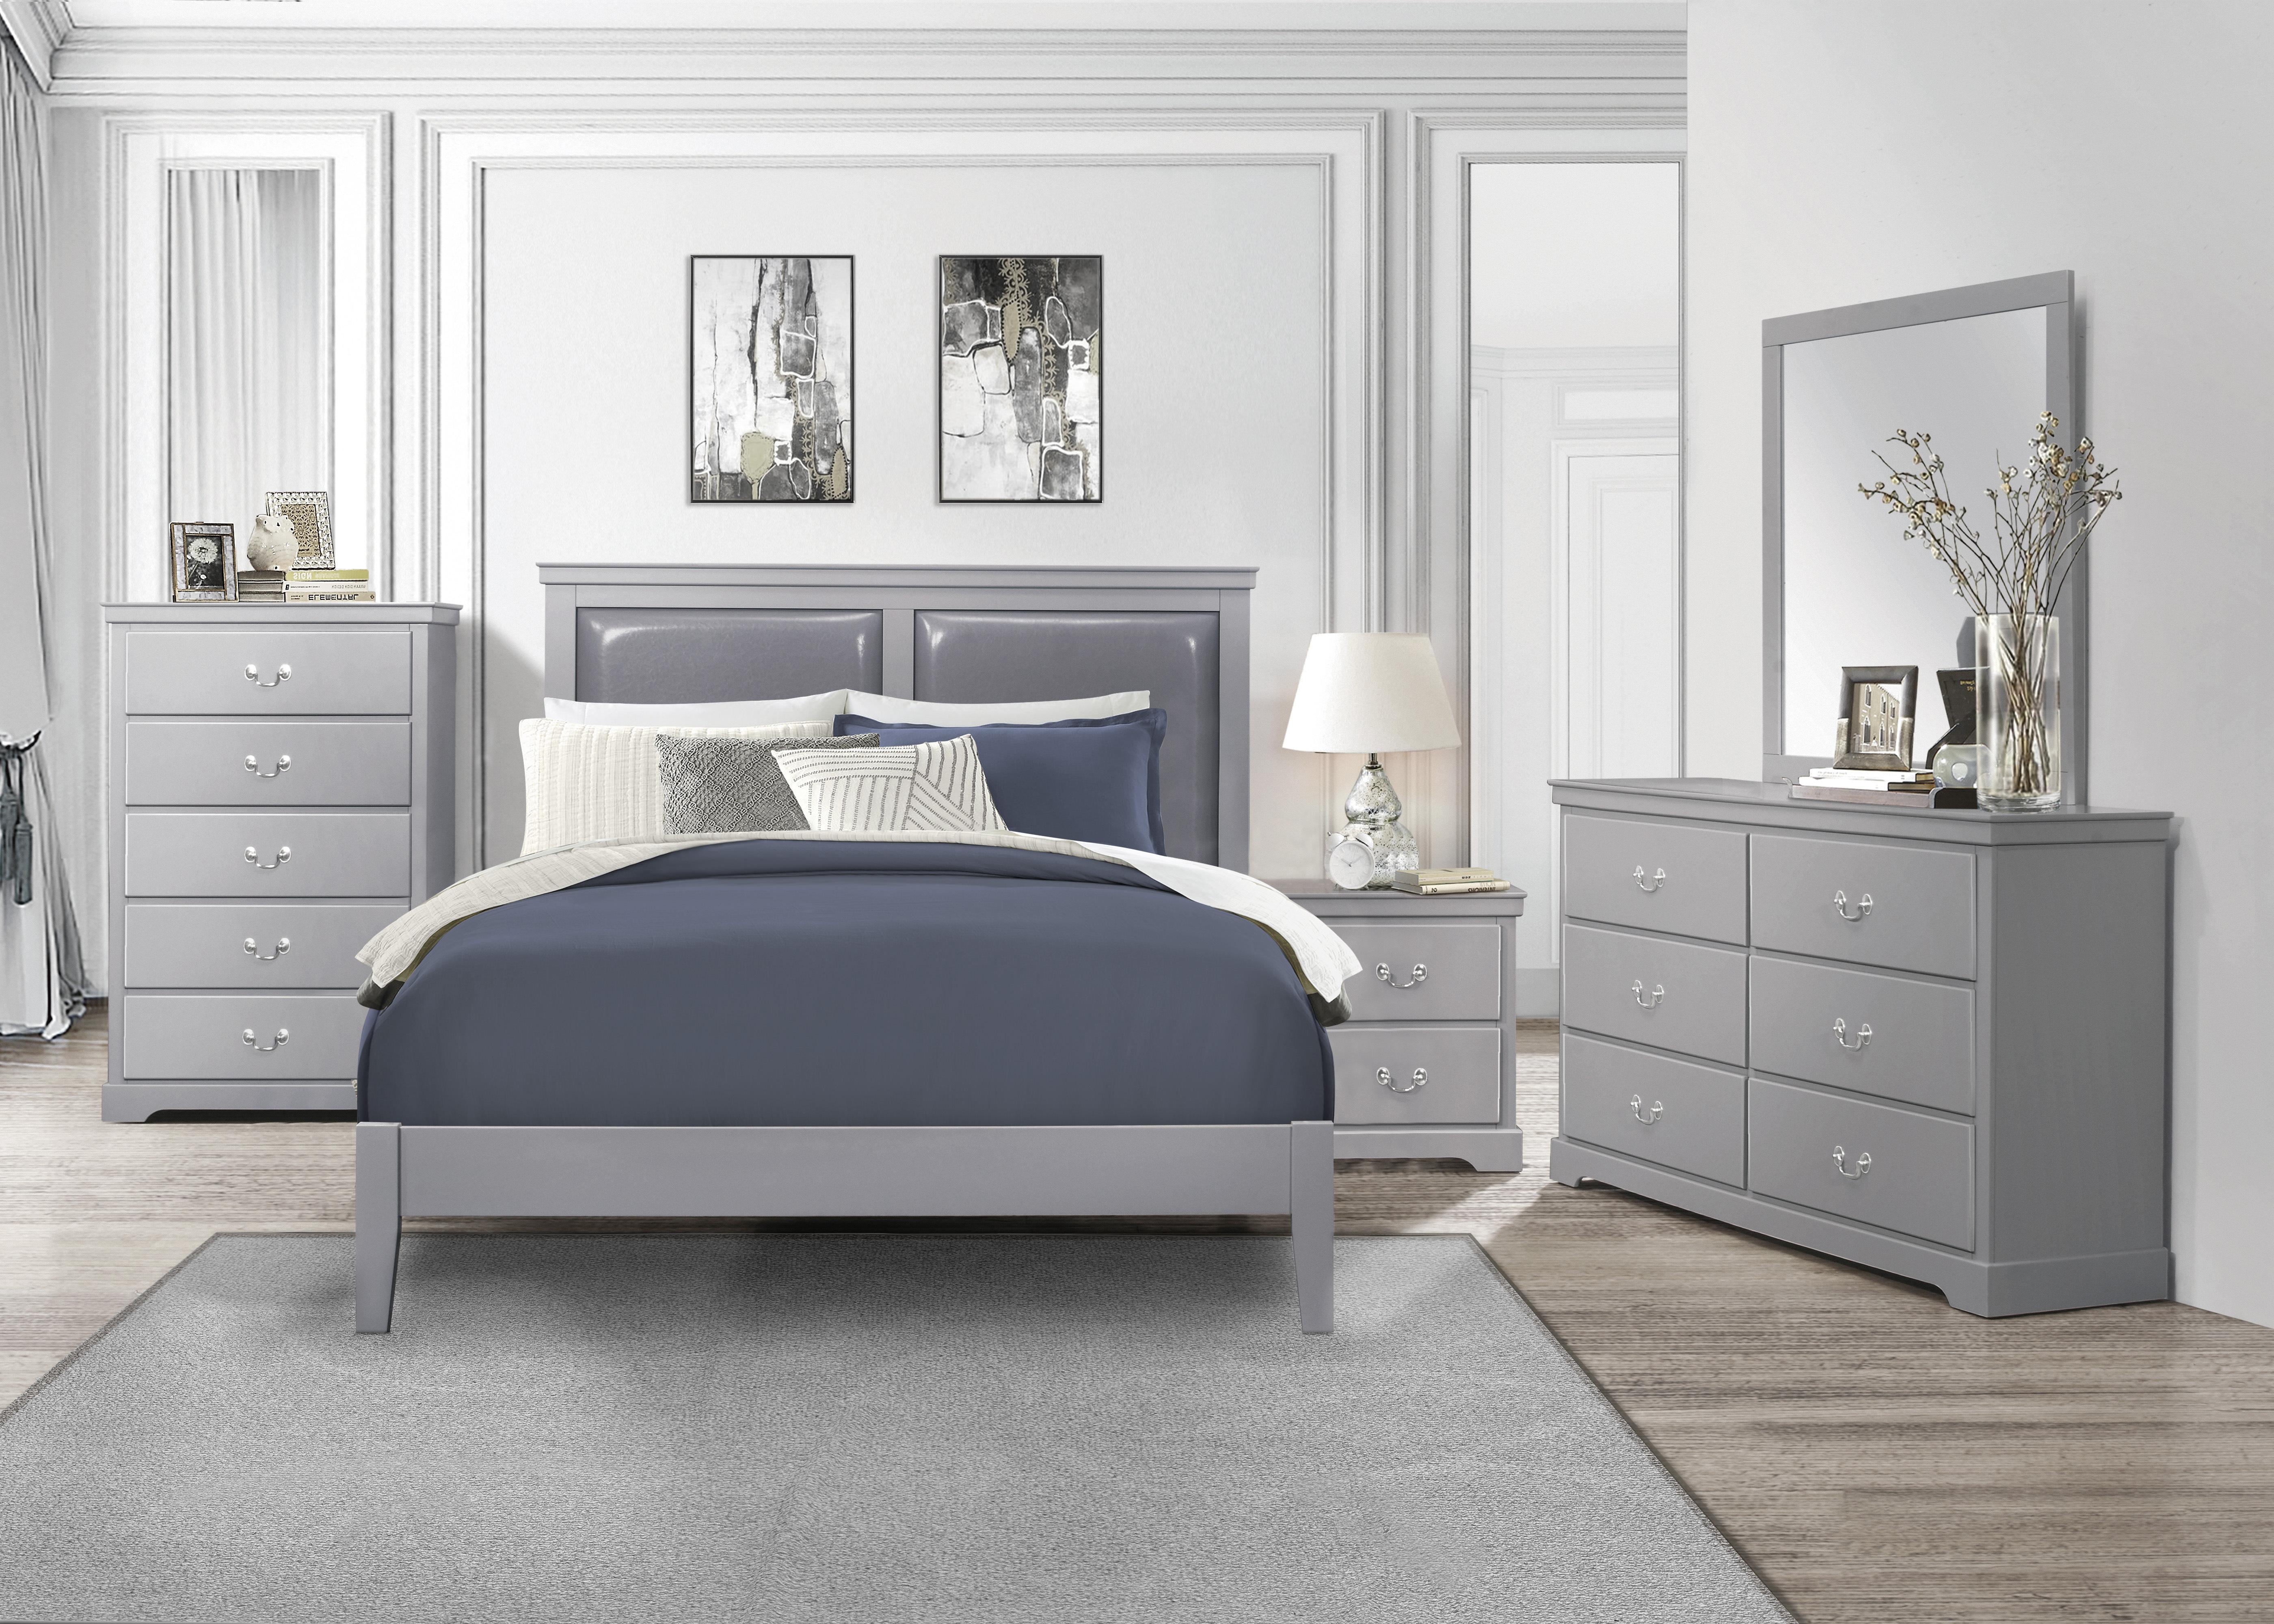 Modern Bedroom Set 1519GYF-1-5PC Seabright 1519GYF-1-5PC in Gray Faux Leather